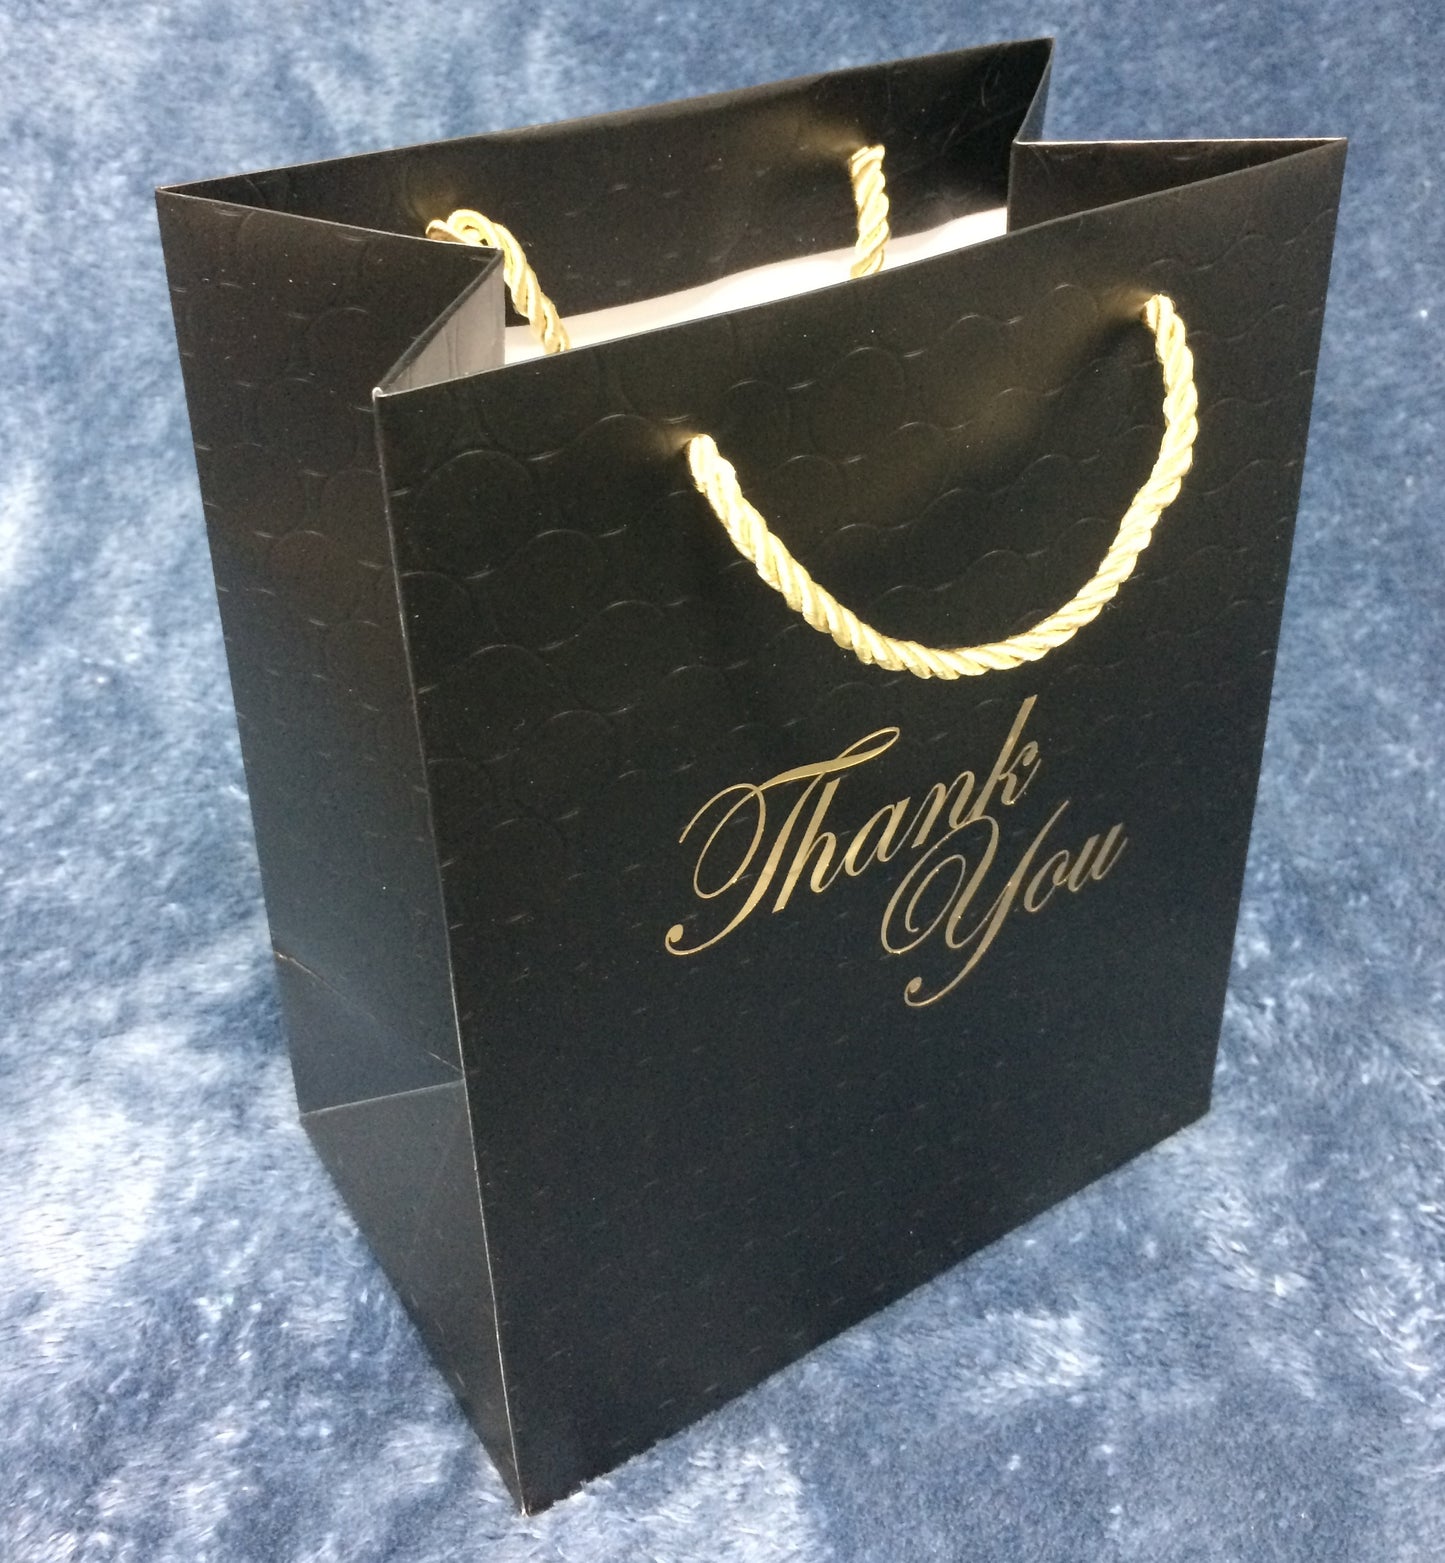 12 Black Thank You Bags with Handles 8x10 Gold Foil Medium Thank U Paper Gift Bags